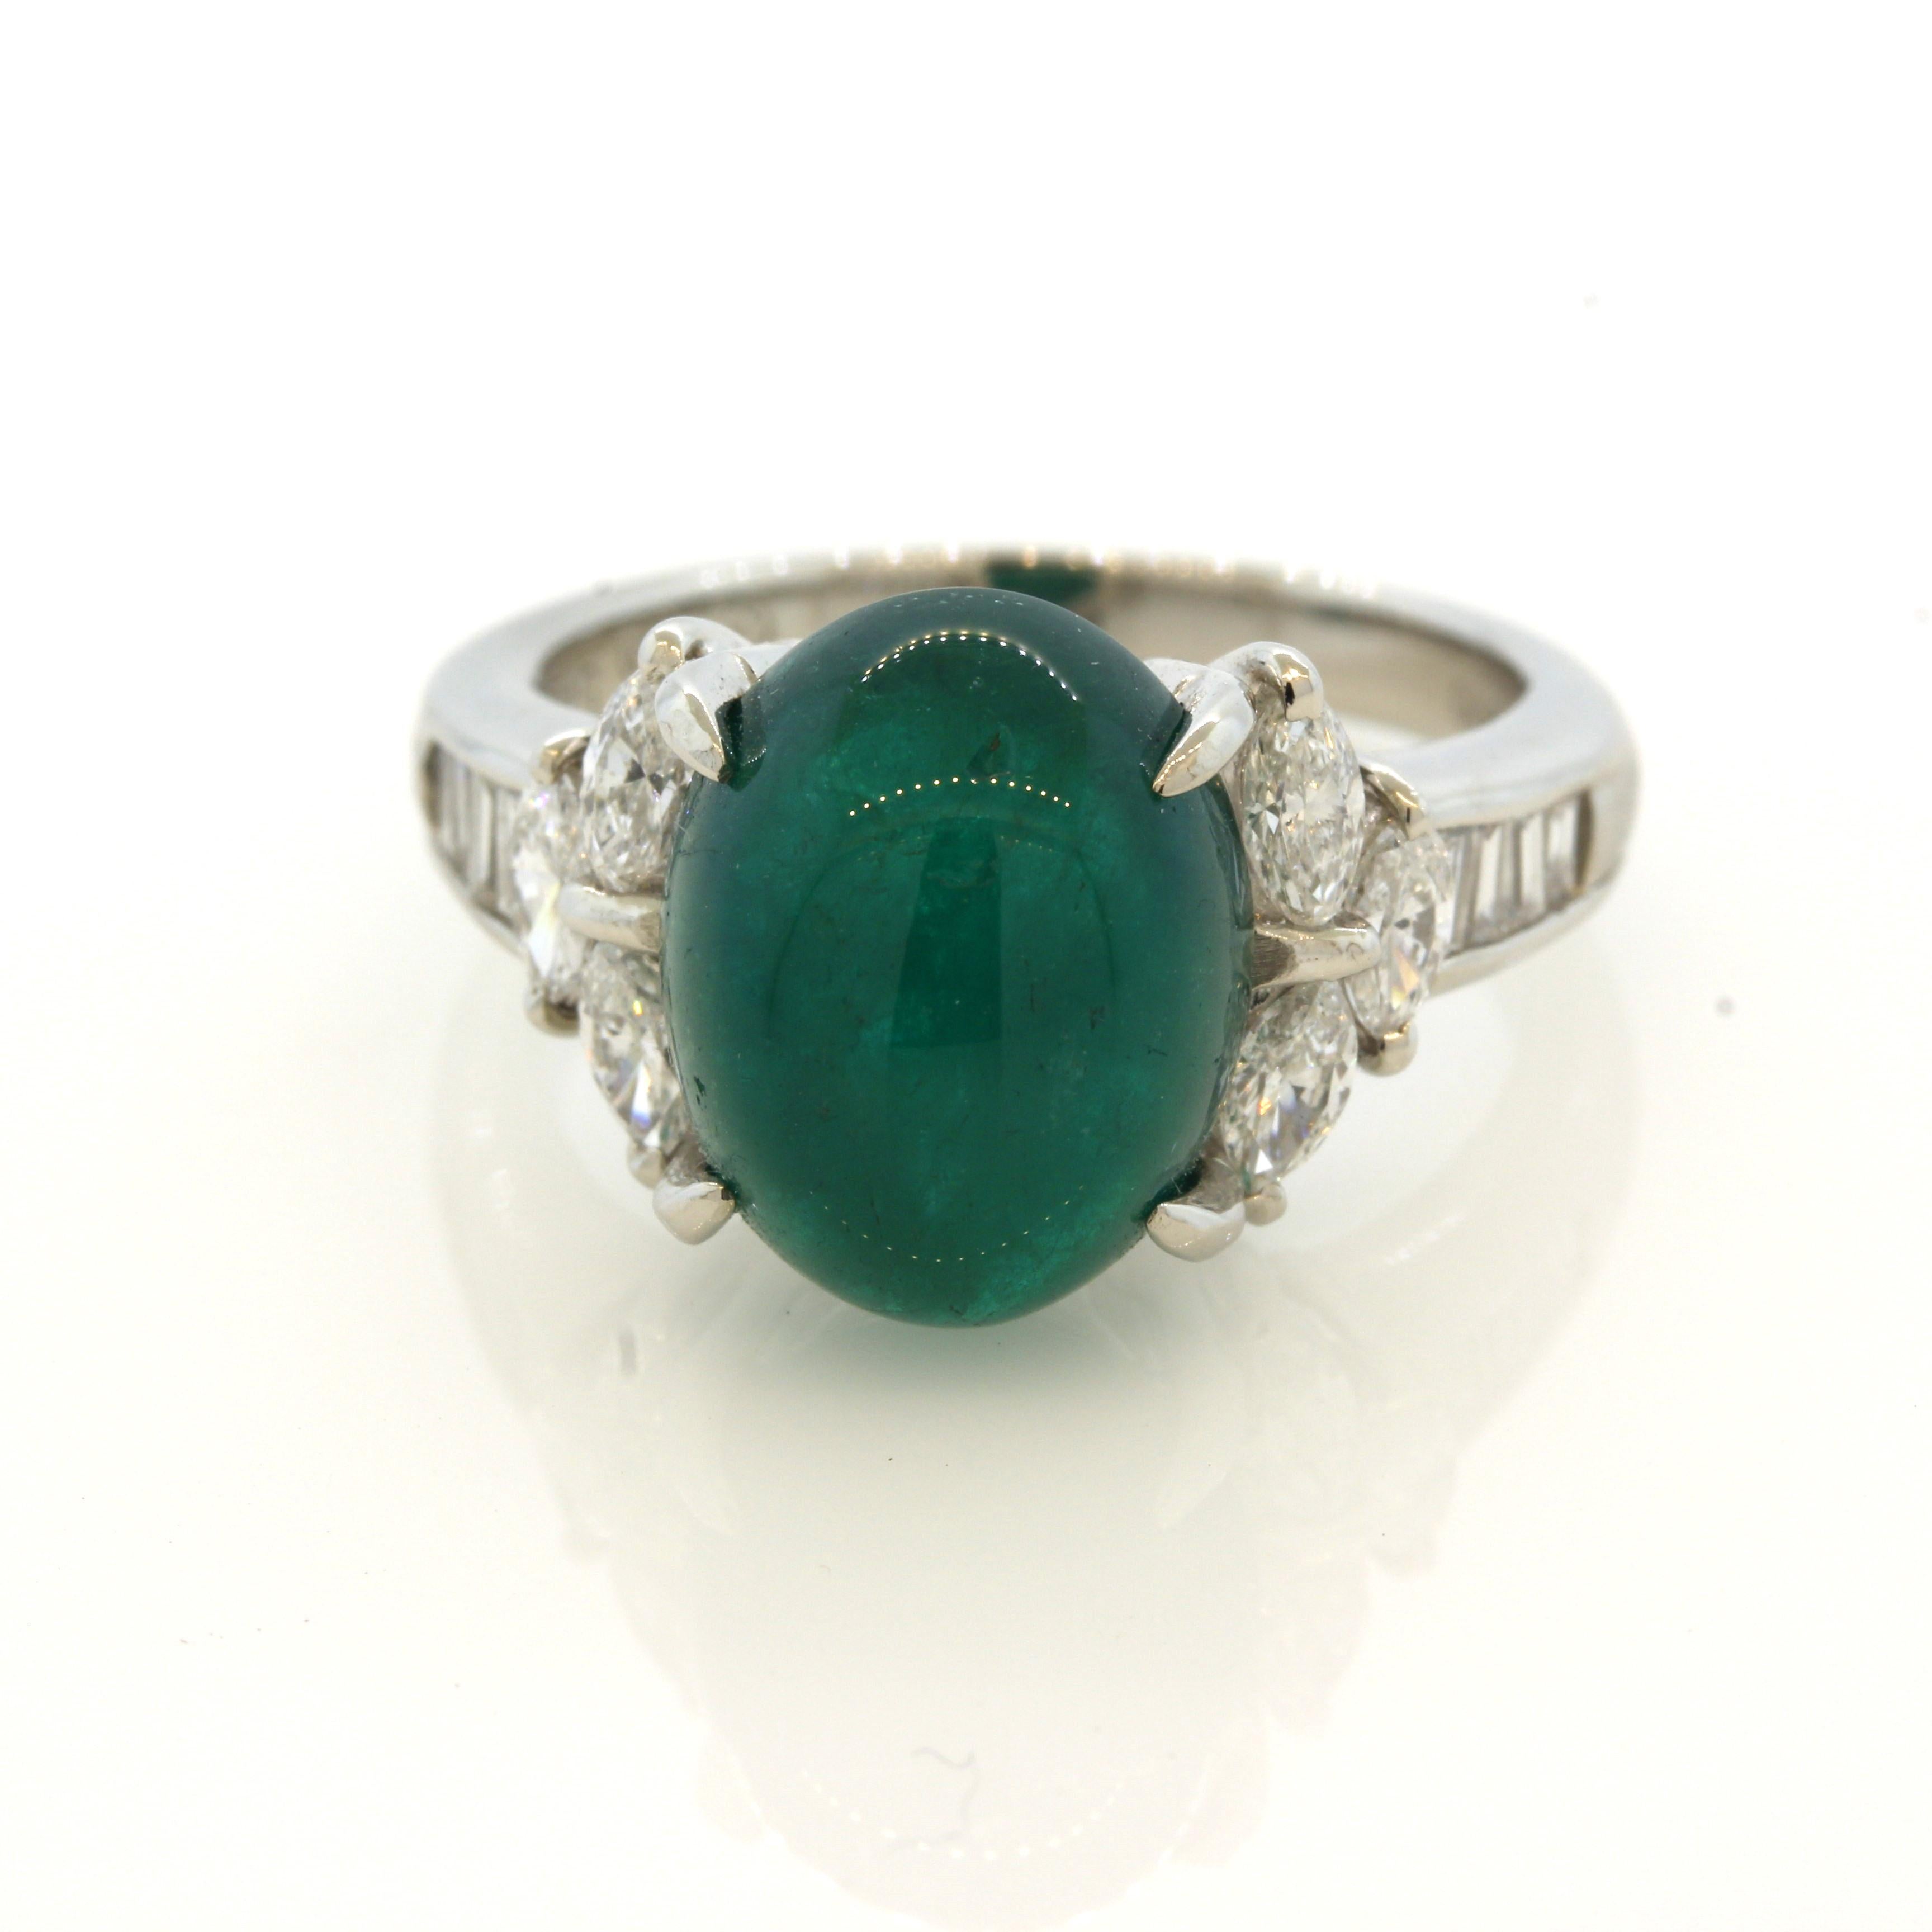 A lovely ring featuring a luscious cabochon emerald weighing 6.62 carats. It has a rich deep green color that will hypnotize you if you stare at it for too long! It is complemented by 0.76 carats of marquise and baguette-cut diamonds set down the